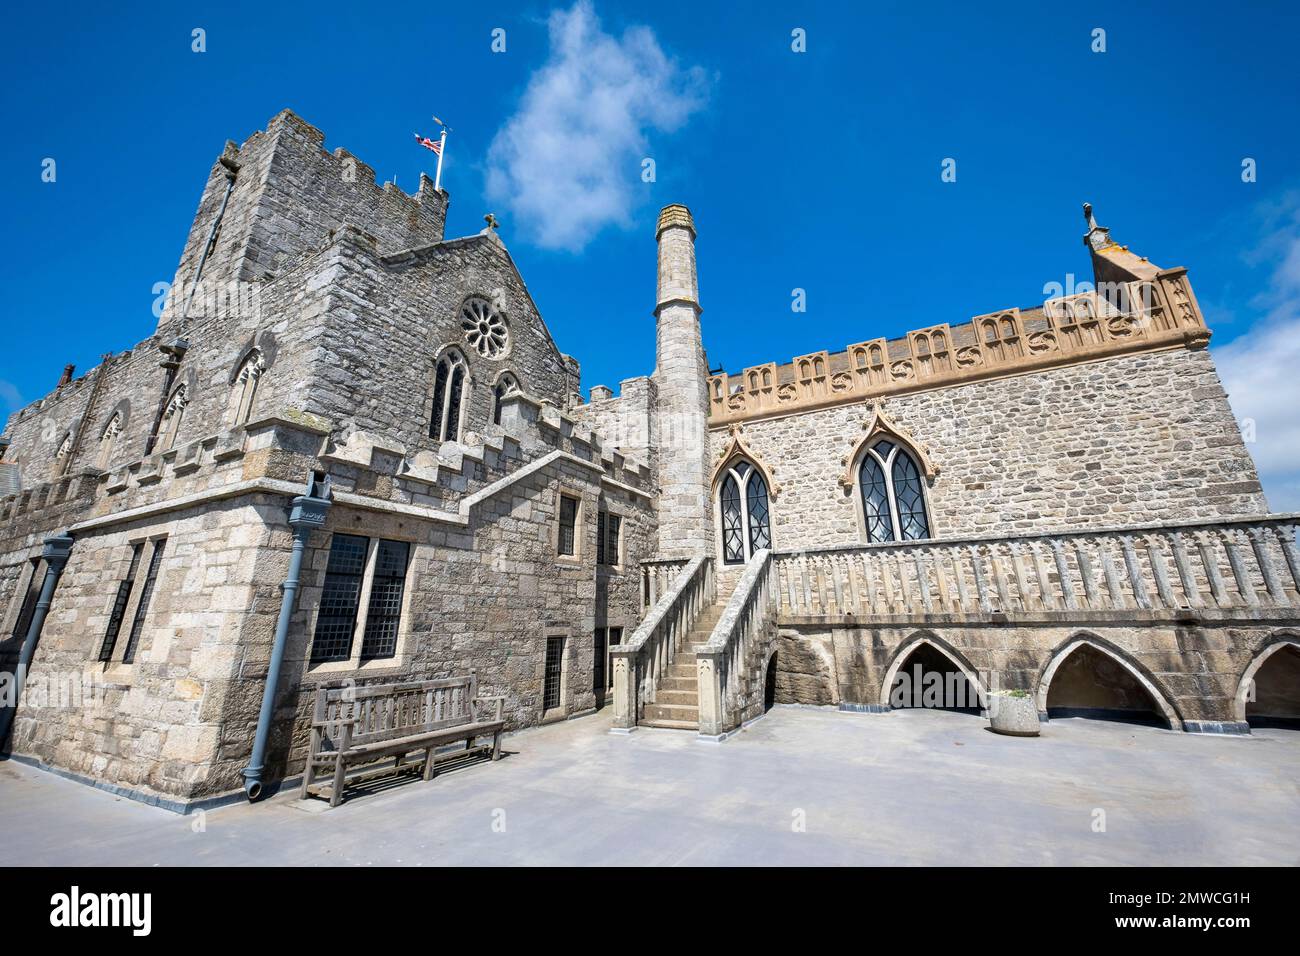 The courtyard and church inside the castle on the island of Saint Michael's Mount, Cornwall, England Stock Photo